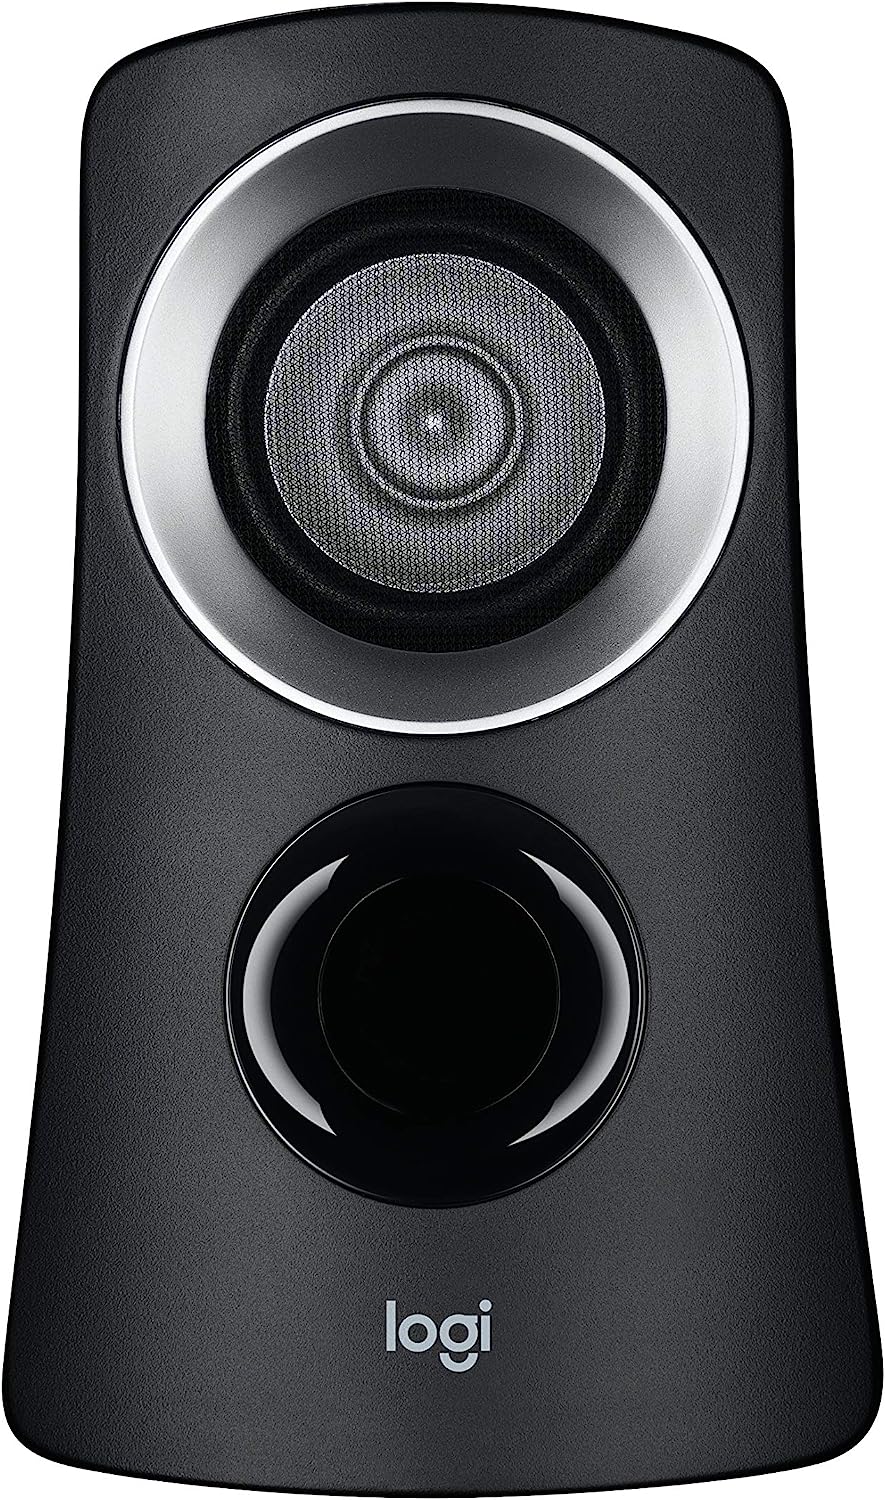 Logitech Z313 2.1 Multimedia Speaker System with Subwoofer, Full Range Audio, 50 Watts Peak Power, Strong Bass, 3.5mm Inputs, PC/PS4/Xbox/TV/Smartphone/Tablet/Music Player - Black - image 4 of 6